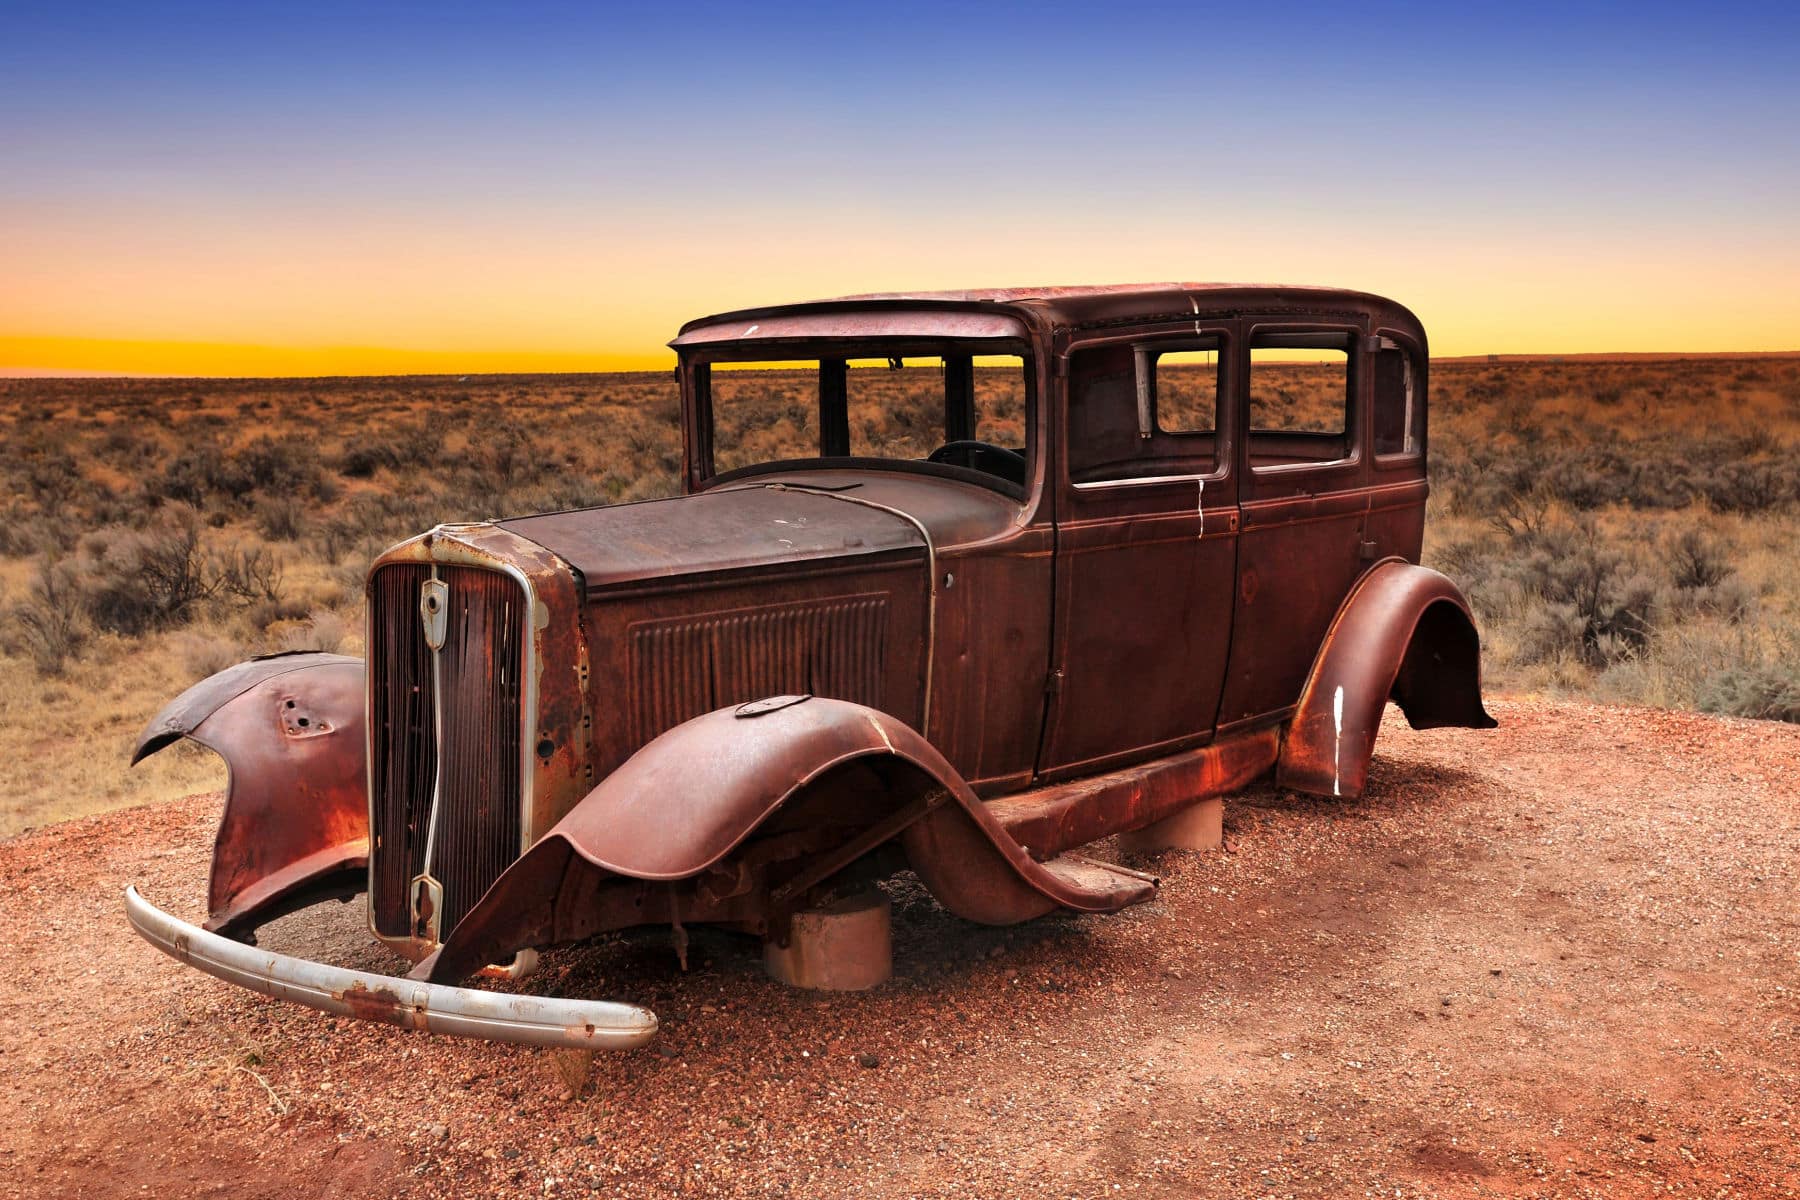 The old Studebaker sits on blocks in Petrified Forest National Park.